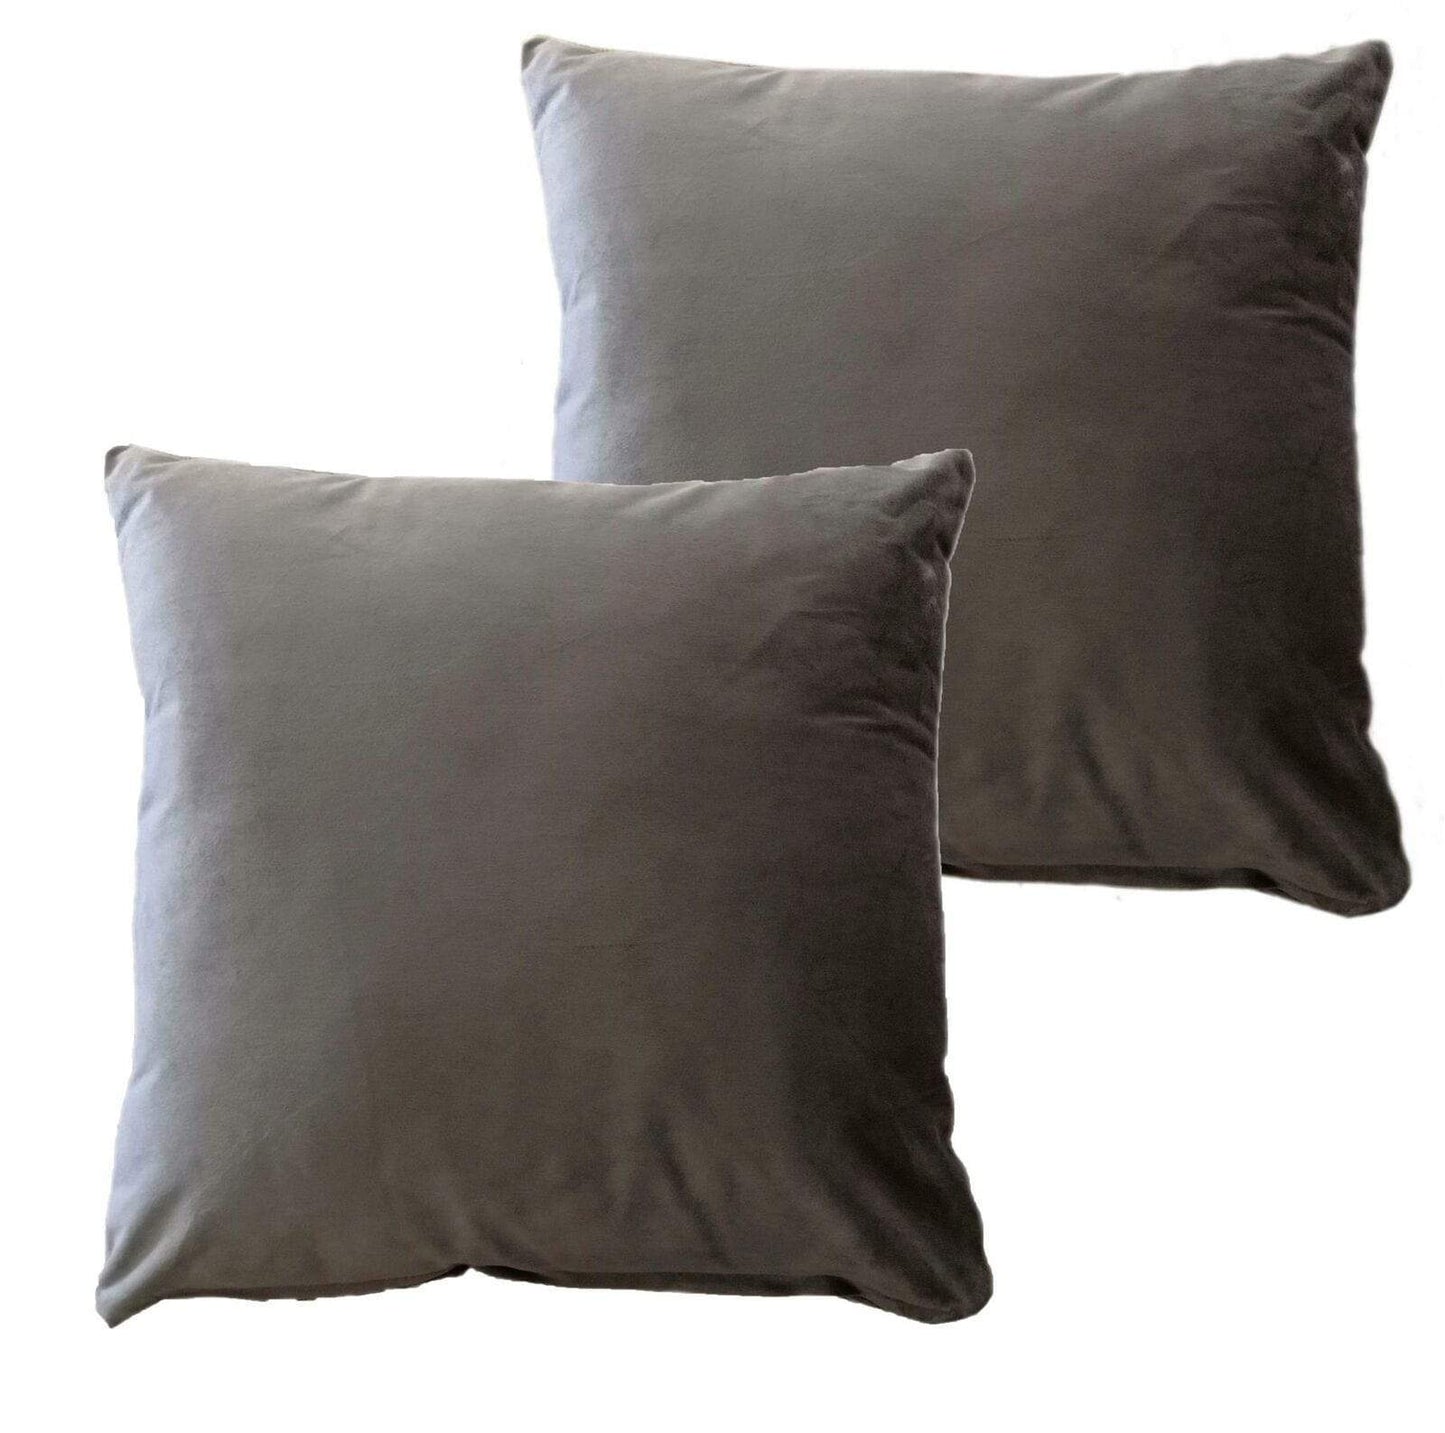 Matte Velvet Cushion Covers CHARCOAL OLIVIA ROCCO Cushions